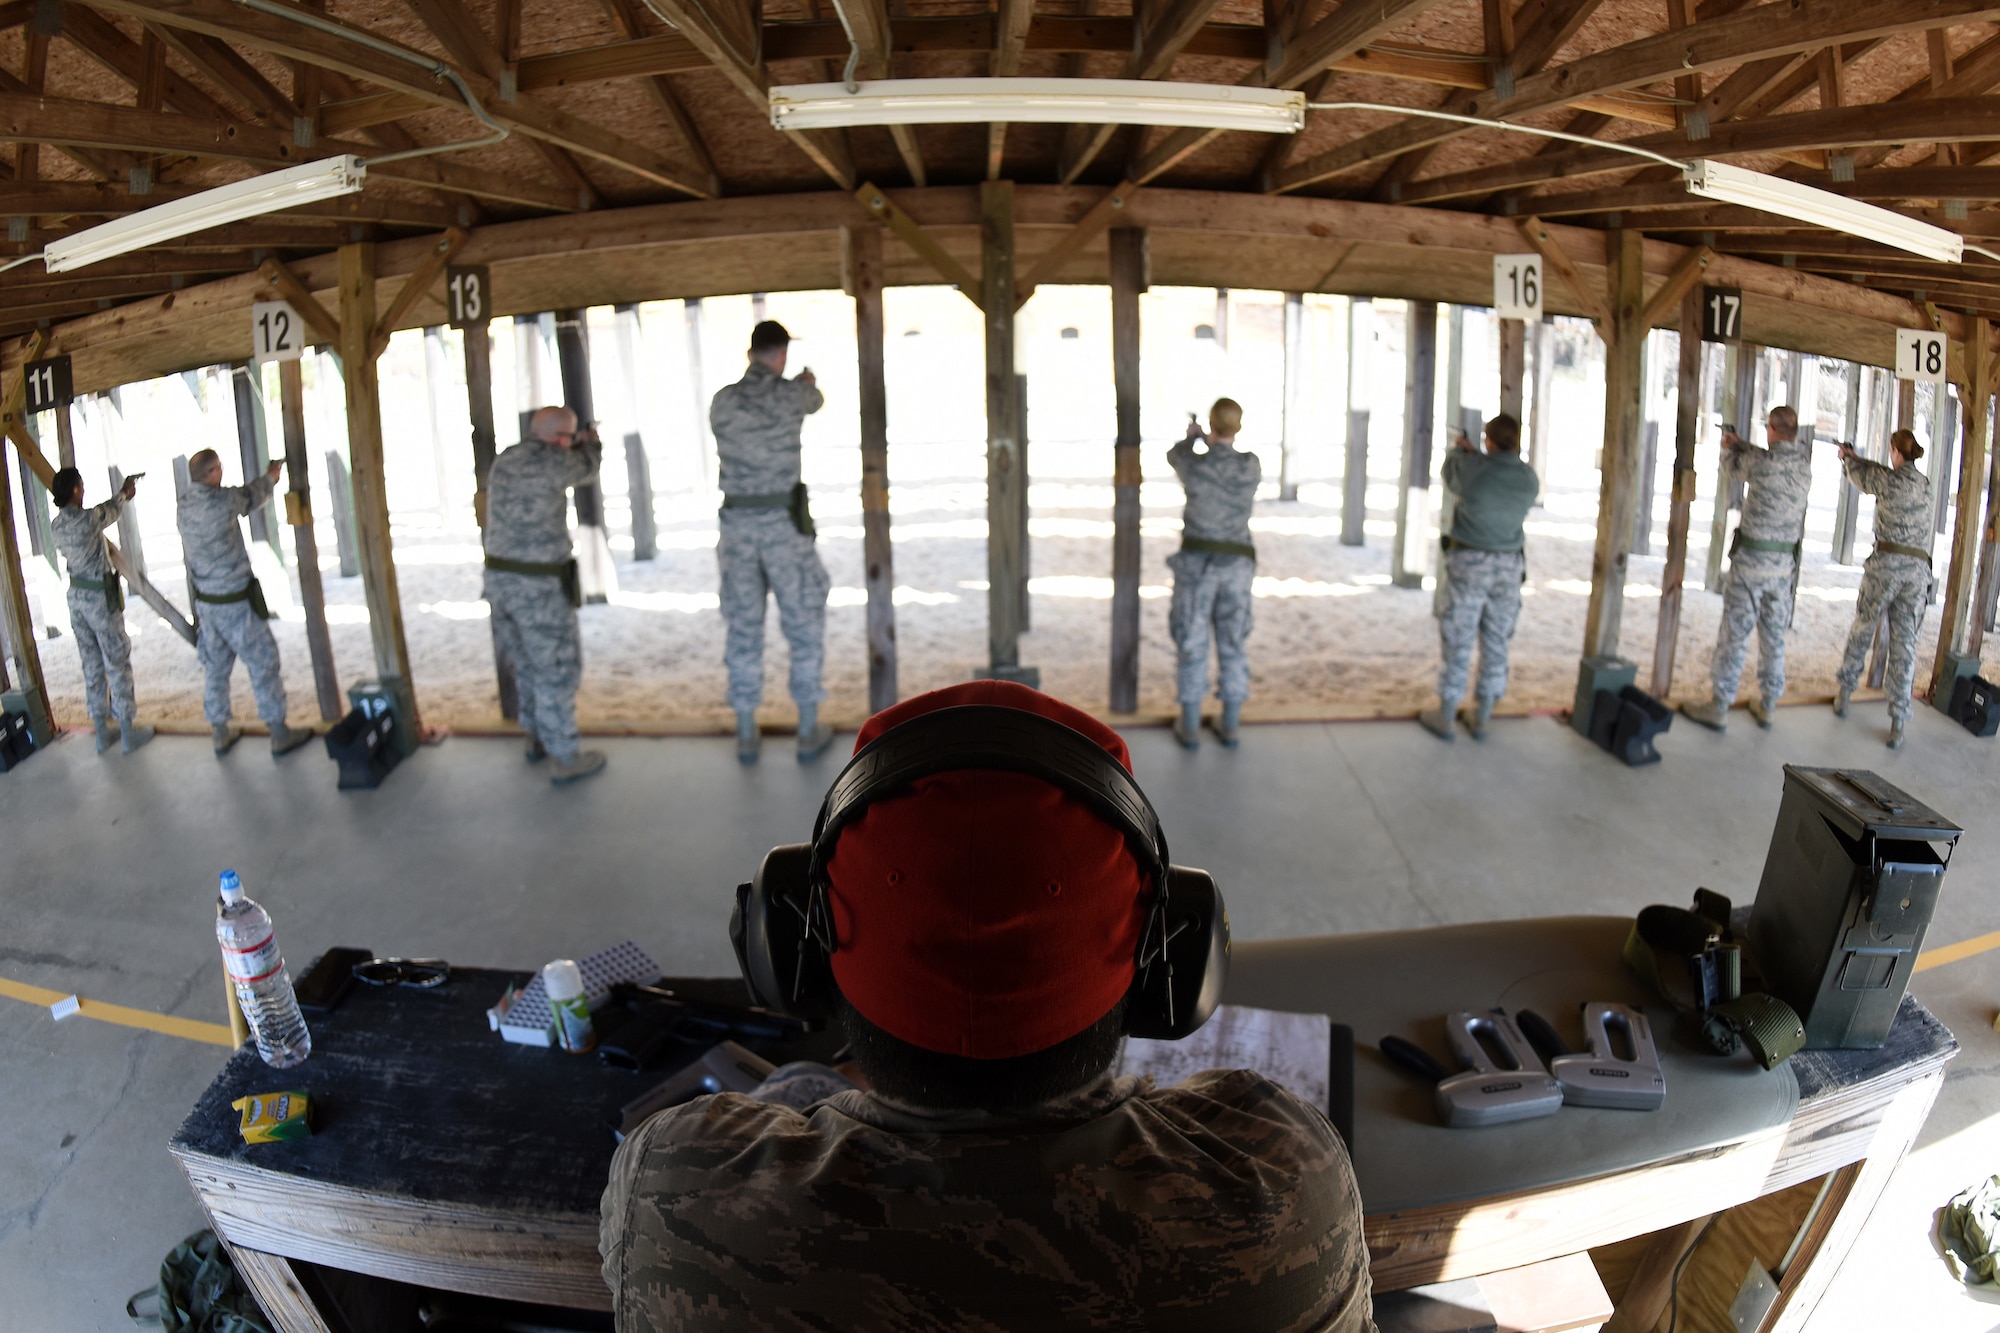 U.S. Air Force Staff Sgt. Andre Buck, a Combat Arms Training and Maintenance instructor with the 169th Security Forces Squadron at McEntire Joint National Guard Base, South Carolina Air National Guard, gives instructions during M-9 pistol qualifications at the base shooting range, April 6, 2018. Swamp Fox Airmen continue to hone routine skills to meet combatant command requirements. The muscle memory that is formed by using this equipment multiple times allows Airmen the ability to focus their attention on completing the mission under austere conditions. (U.S. Air National Guard photo by Master Sgt. Caycee Watson)